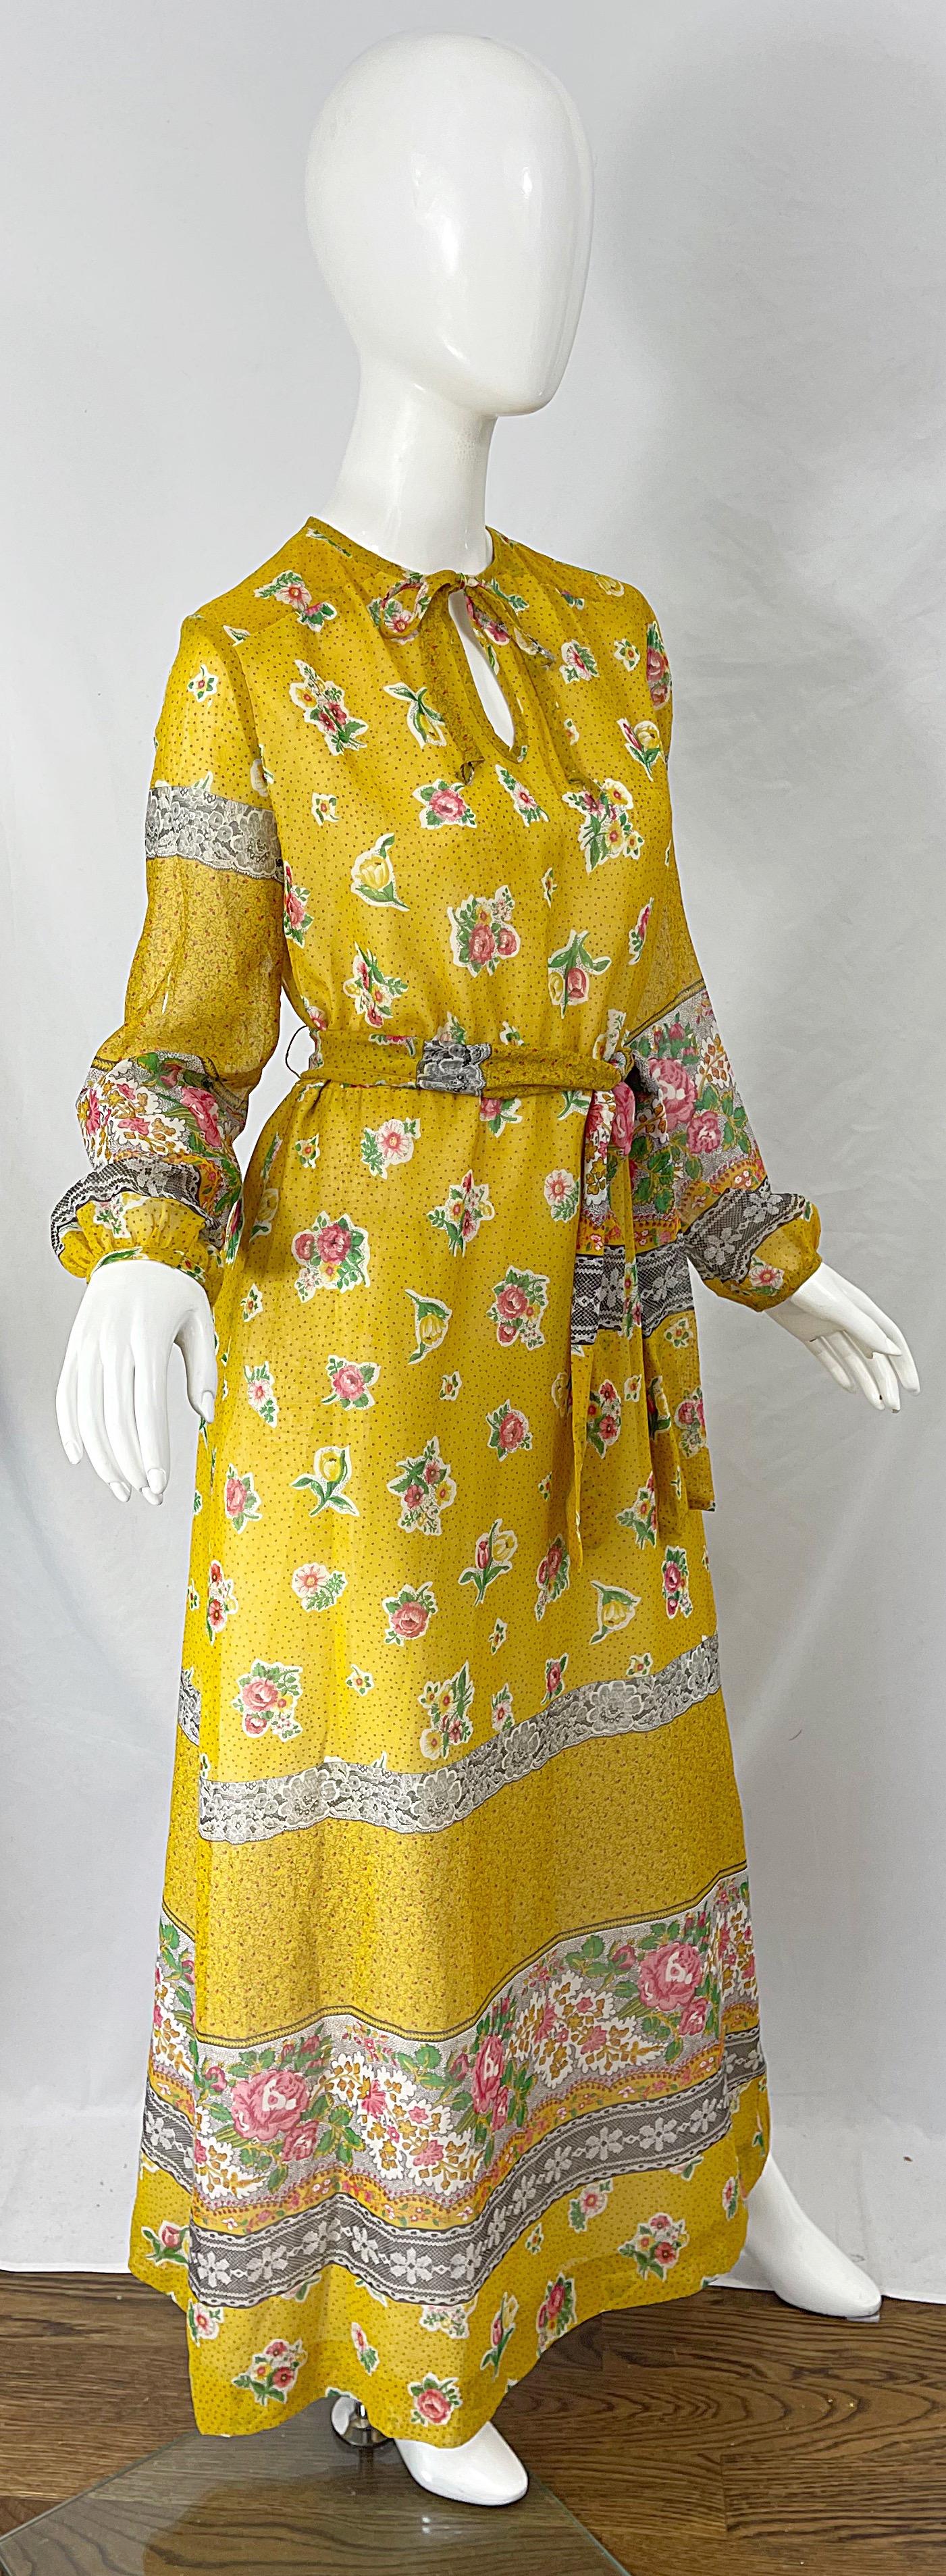 1970s Gay Gibson Trompe L’Oeil Lace Print Yellow Cotton Voile 70s Maxi Dress For Sale 2